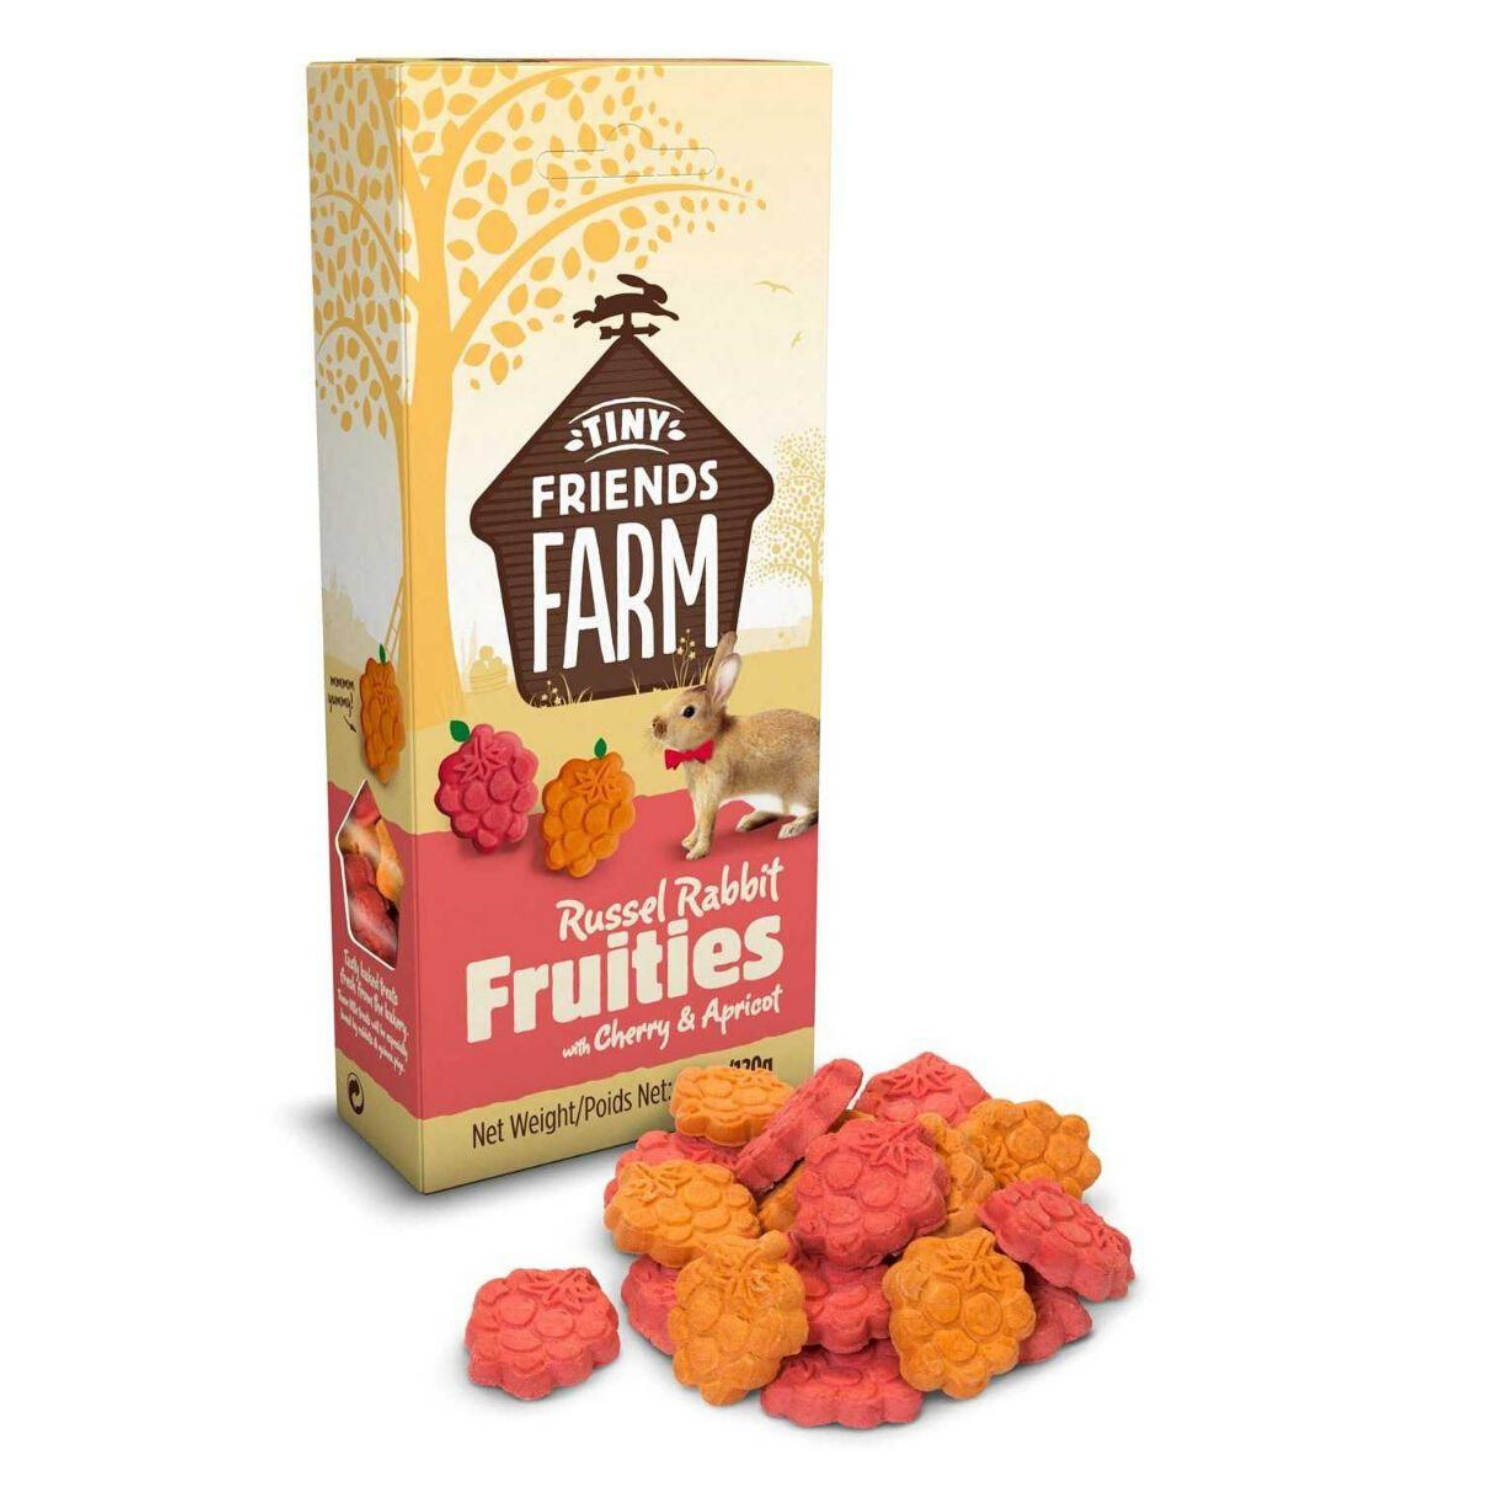 Supreme Tiny Friends Farm Treats Russel Rabbit Fruities with (Cherry & Apricot) - 120g